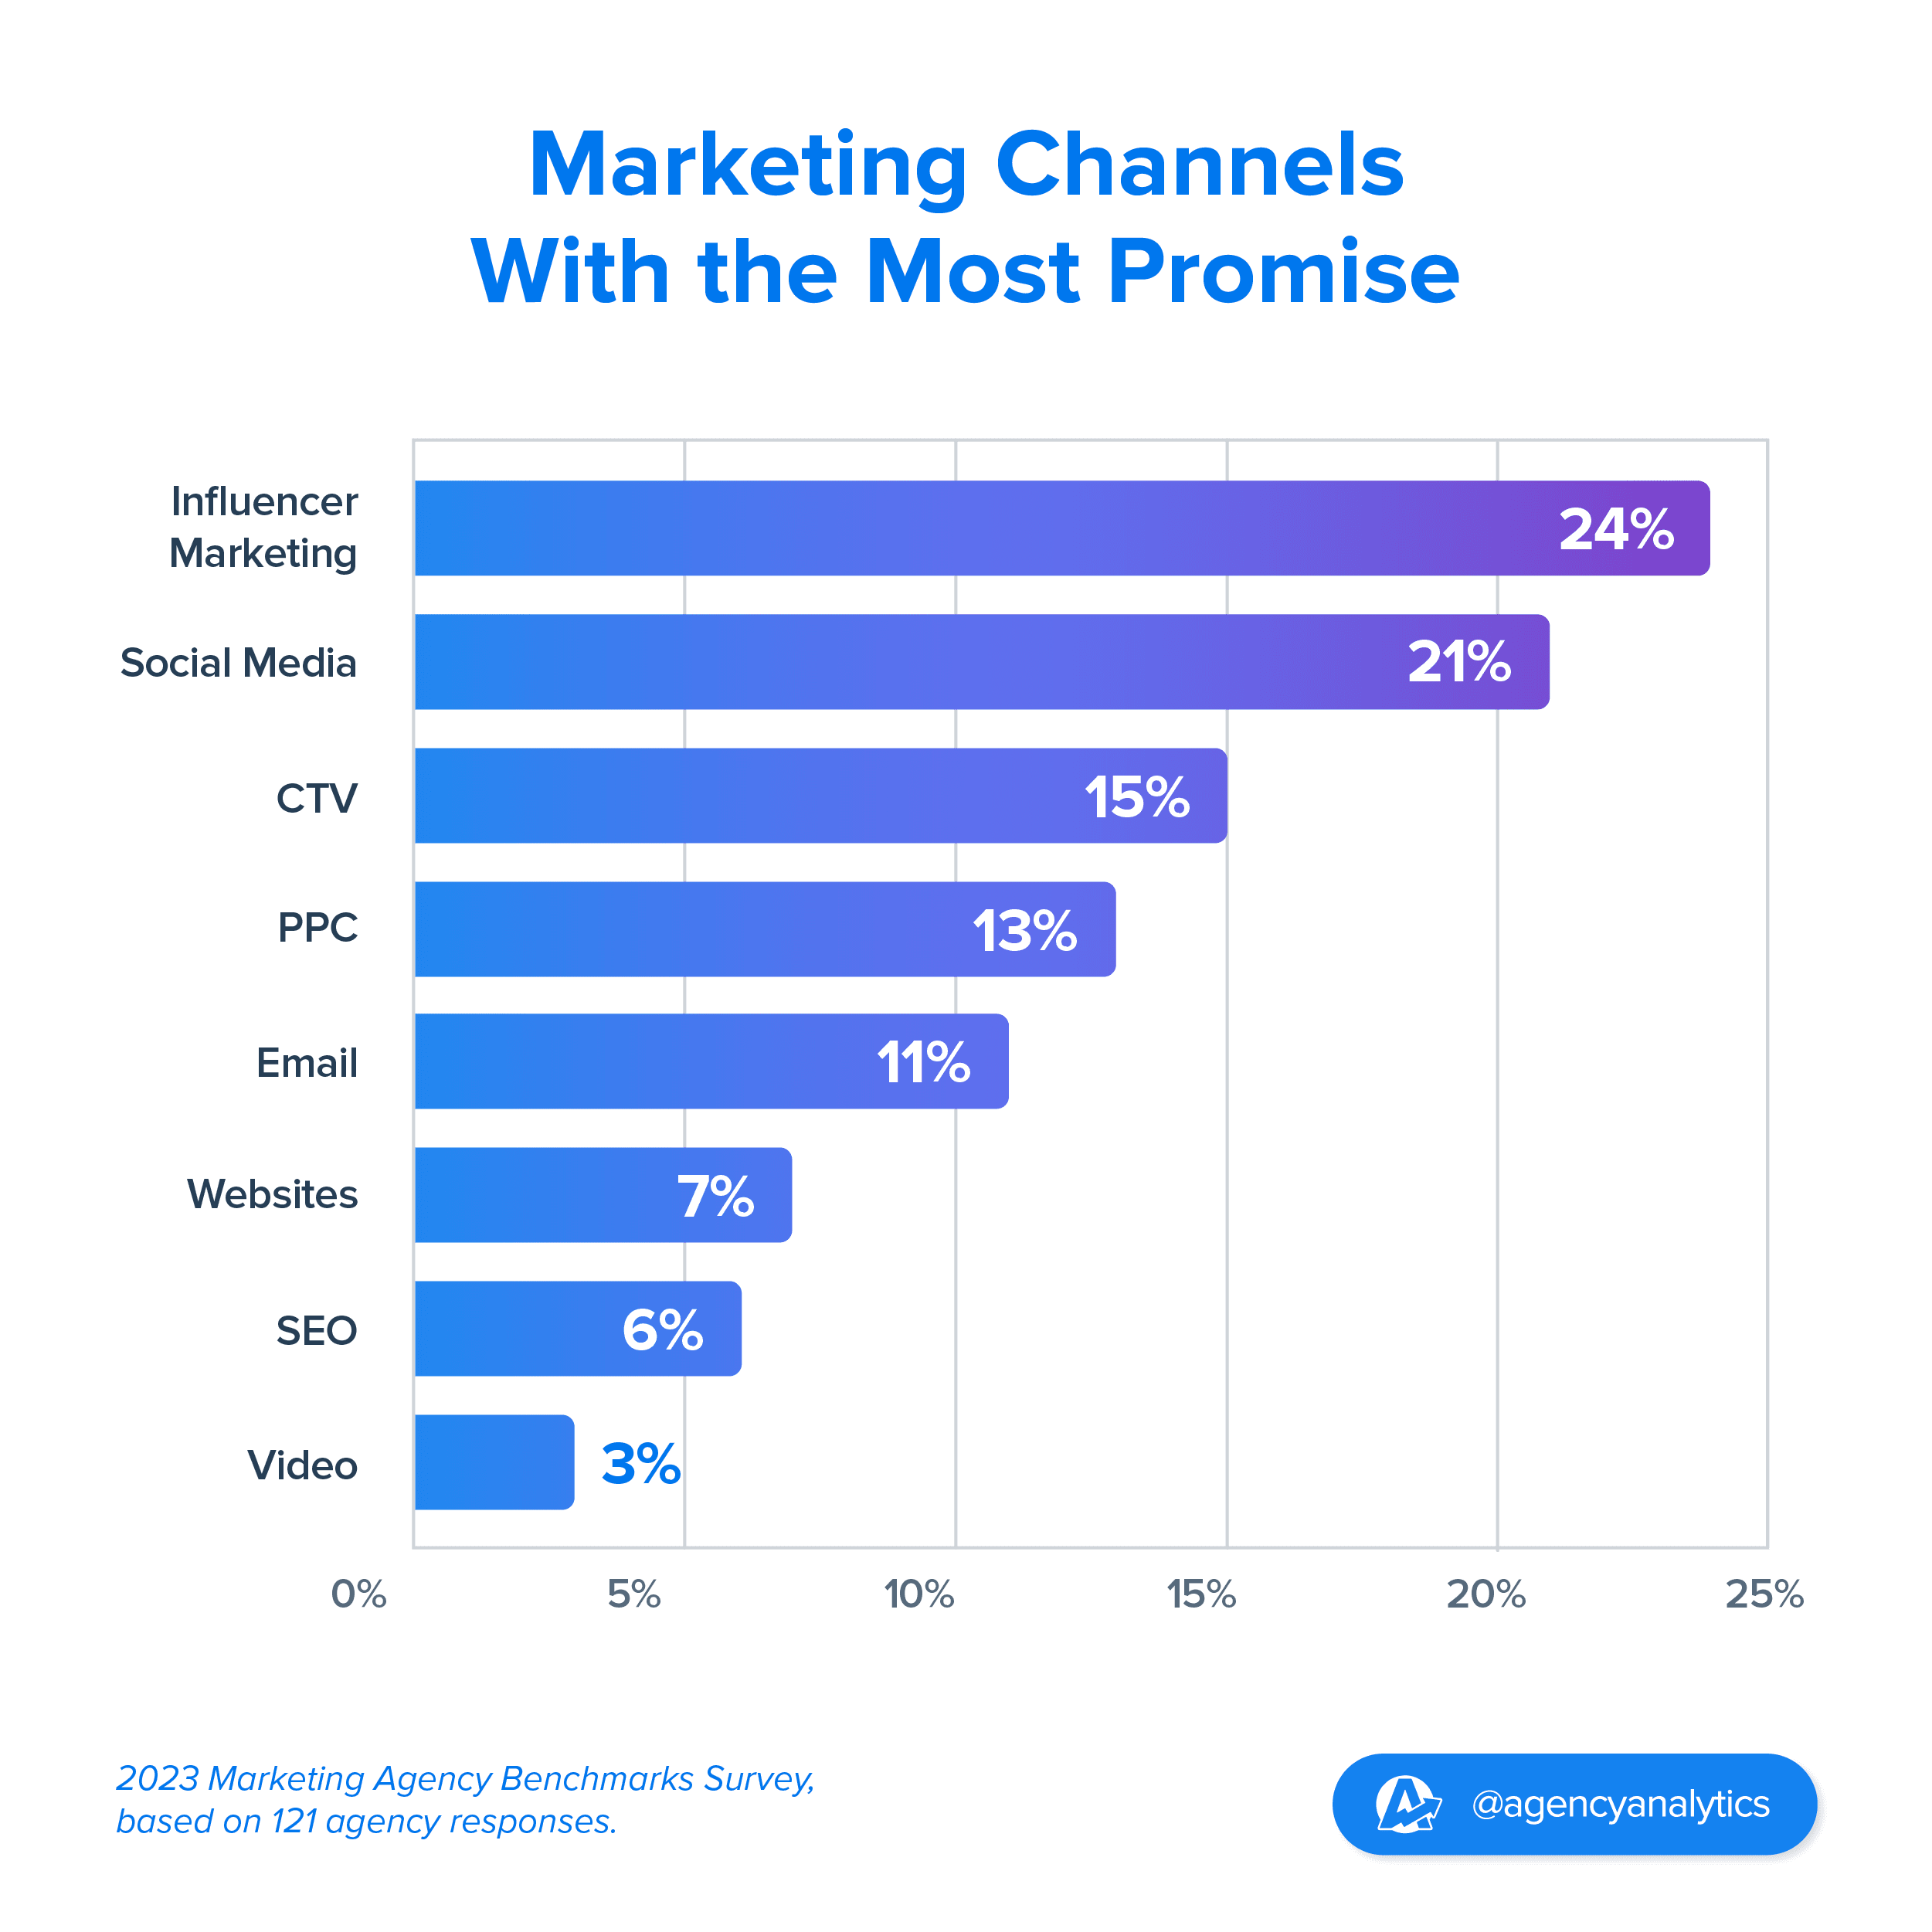 Graph showing the Best Marketing Channels according to Marketing Agencies